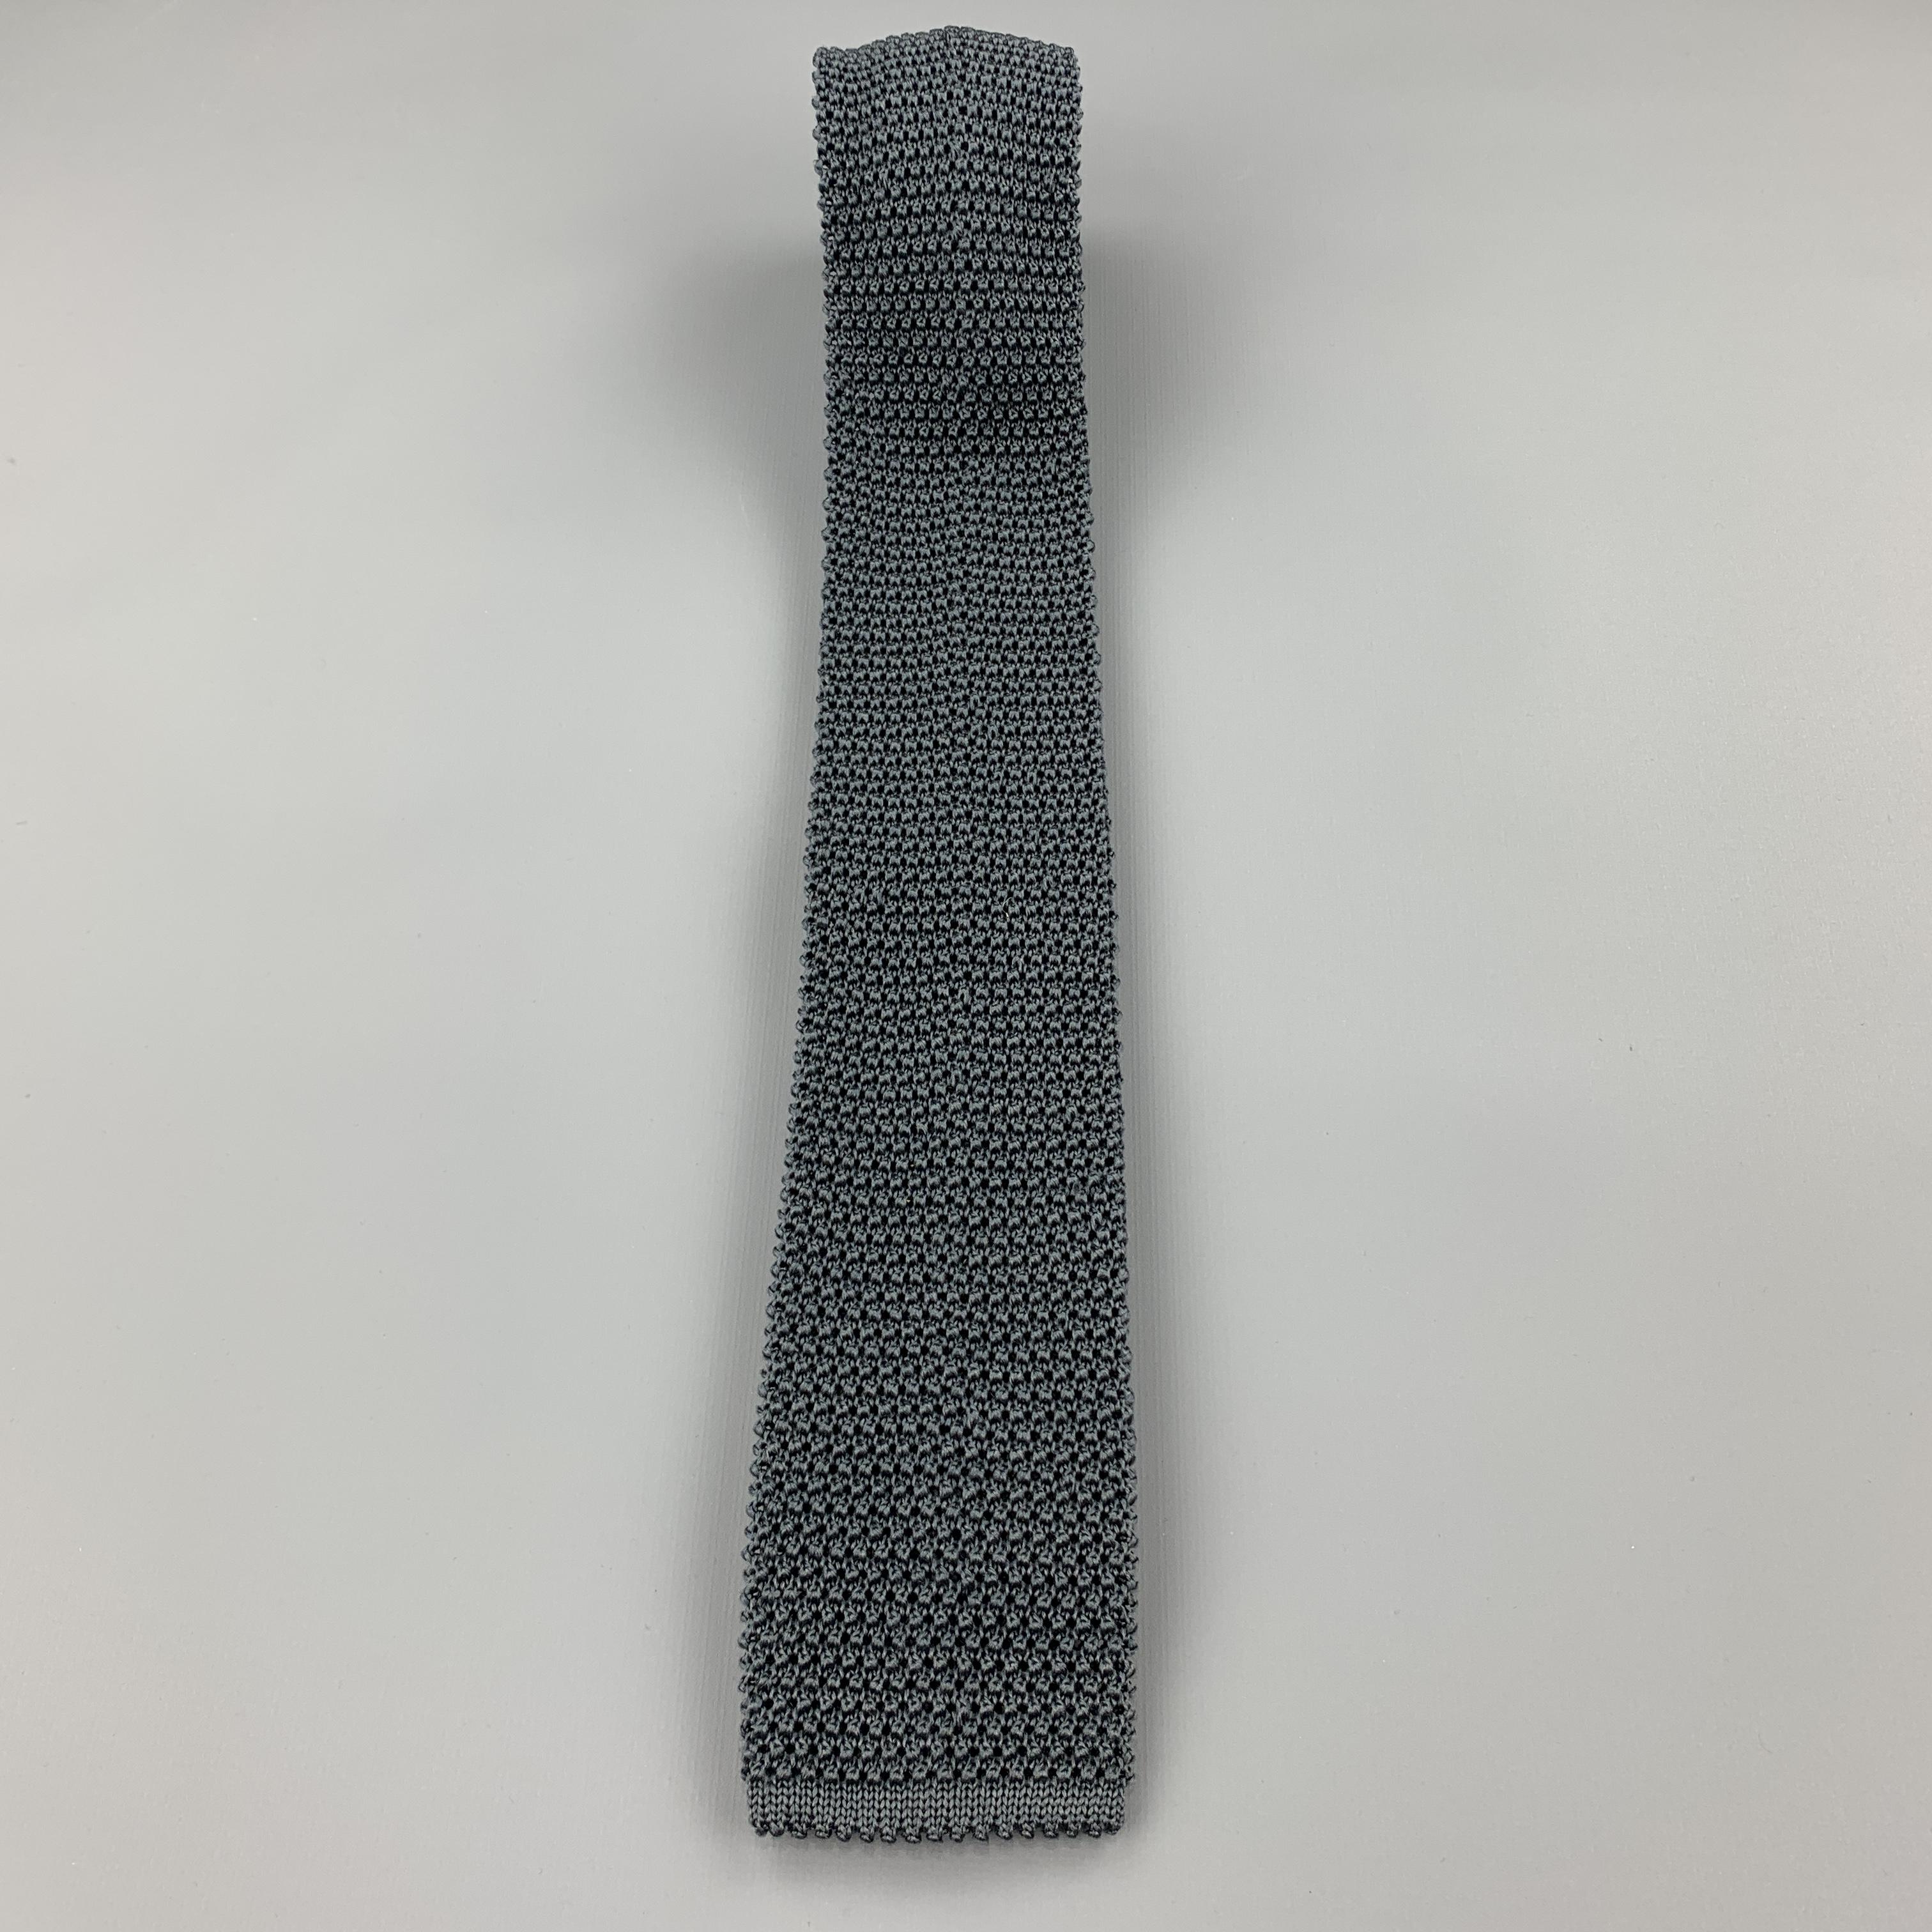 CHARVET neck tie comes in a textured silk knit with a square tip. Made in France.

Excellent Pre-Owned Condition.

Width: 2.5 in.